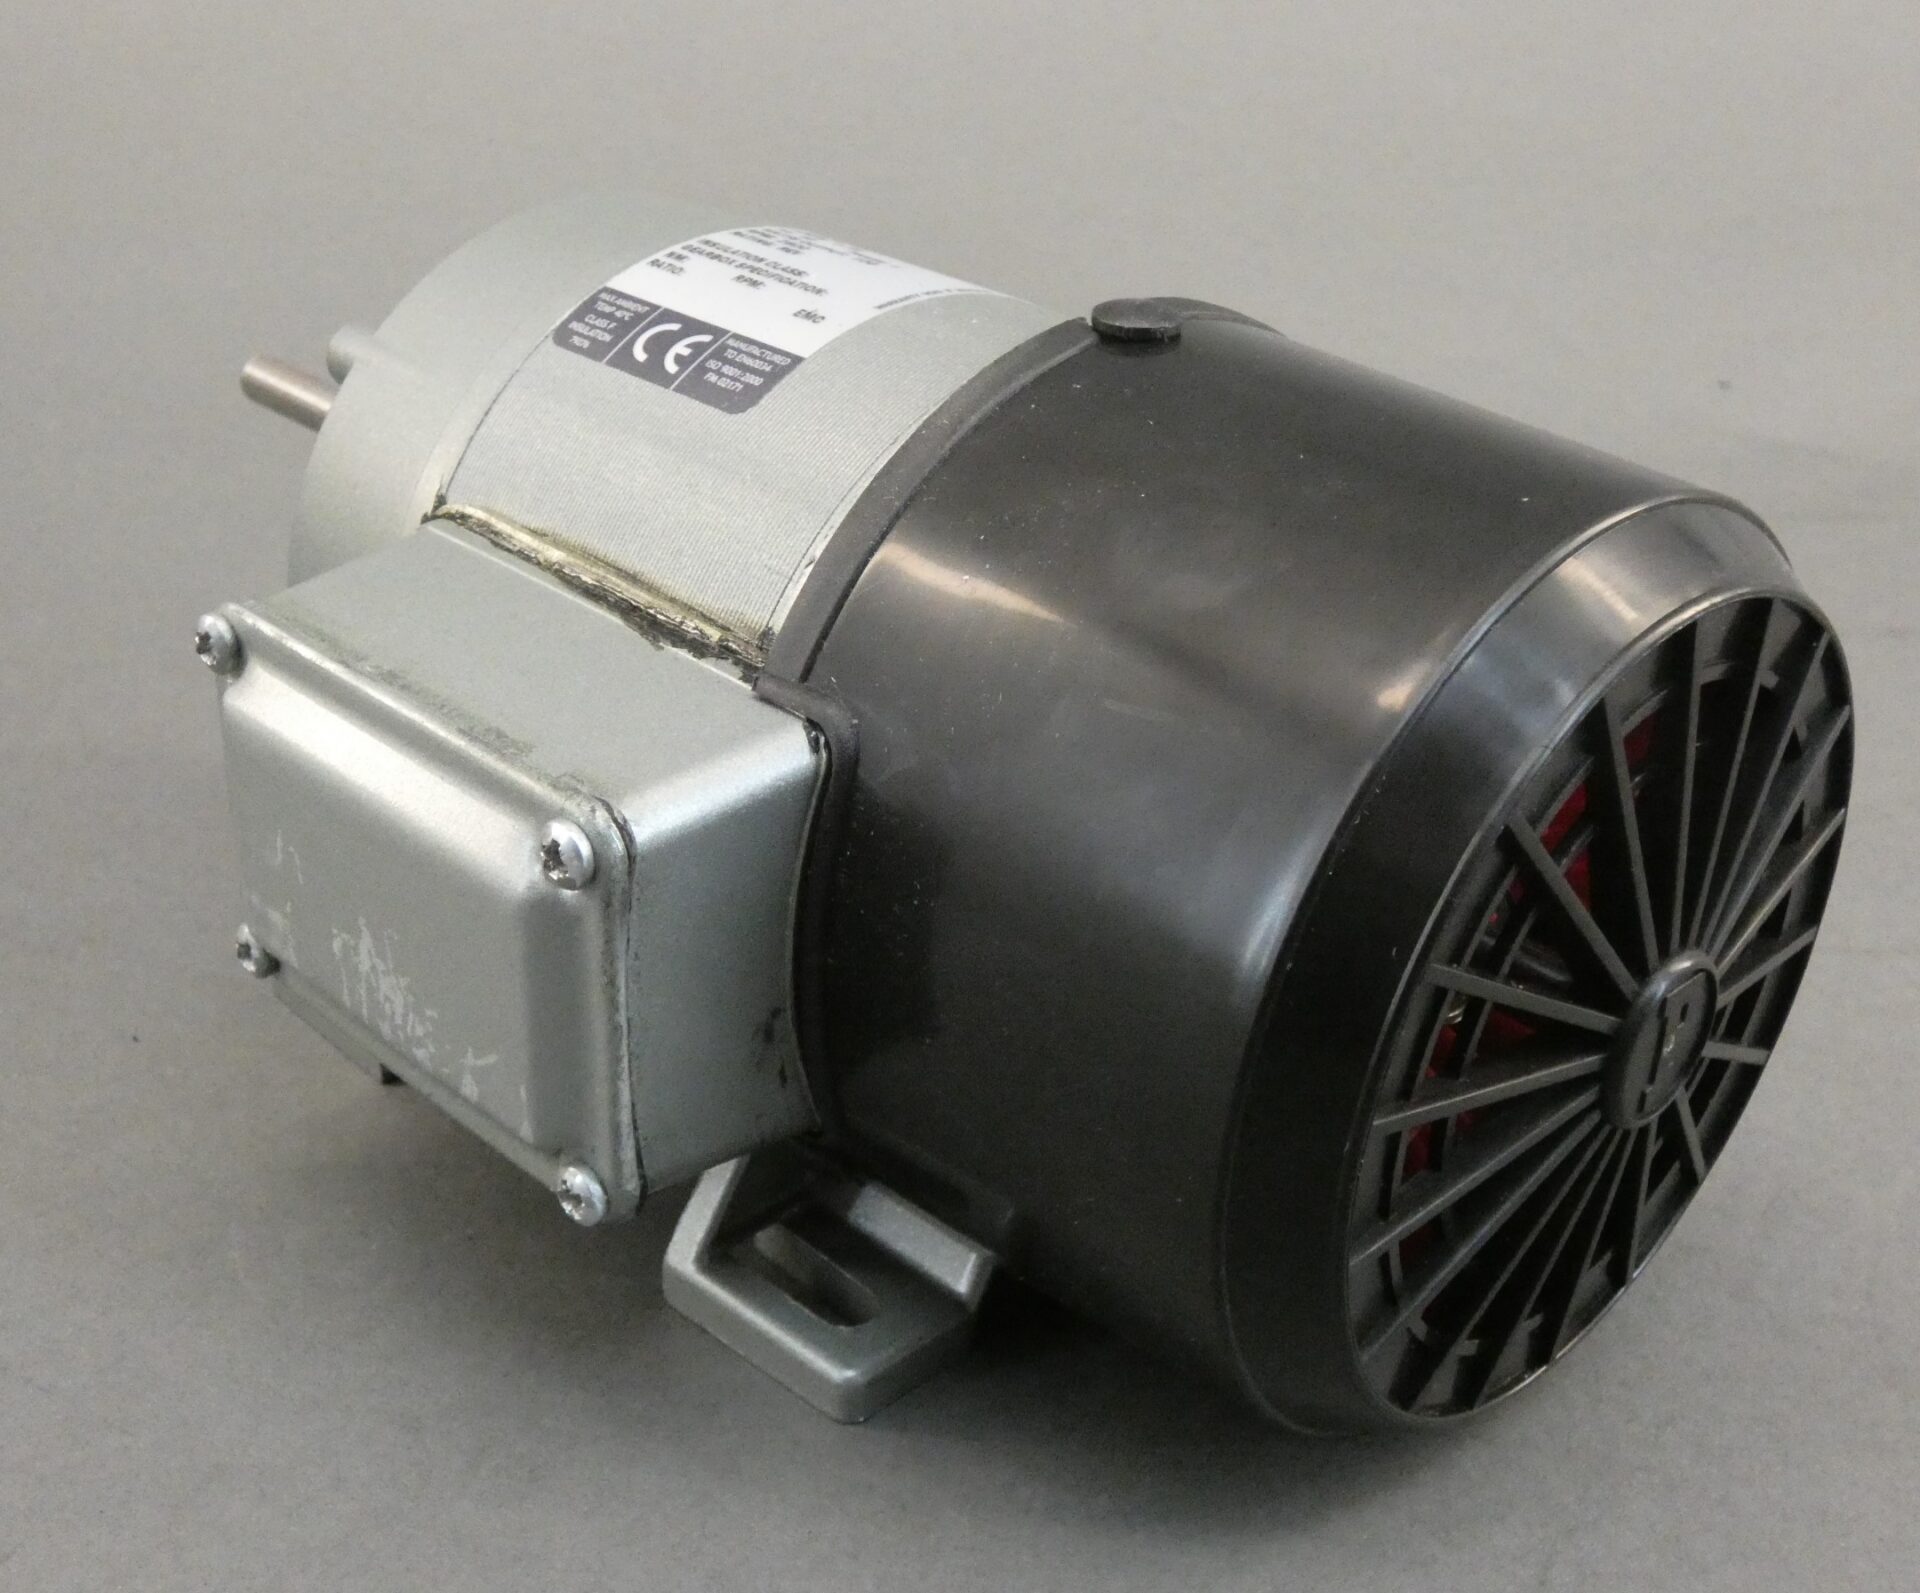 MISSING FAN COWL Parvalux 100w SD28 AC Electric Motor Single Phase 2800RPM 